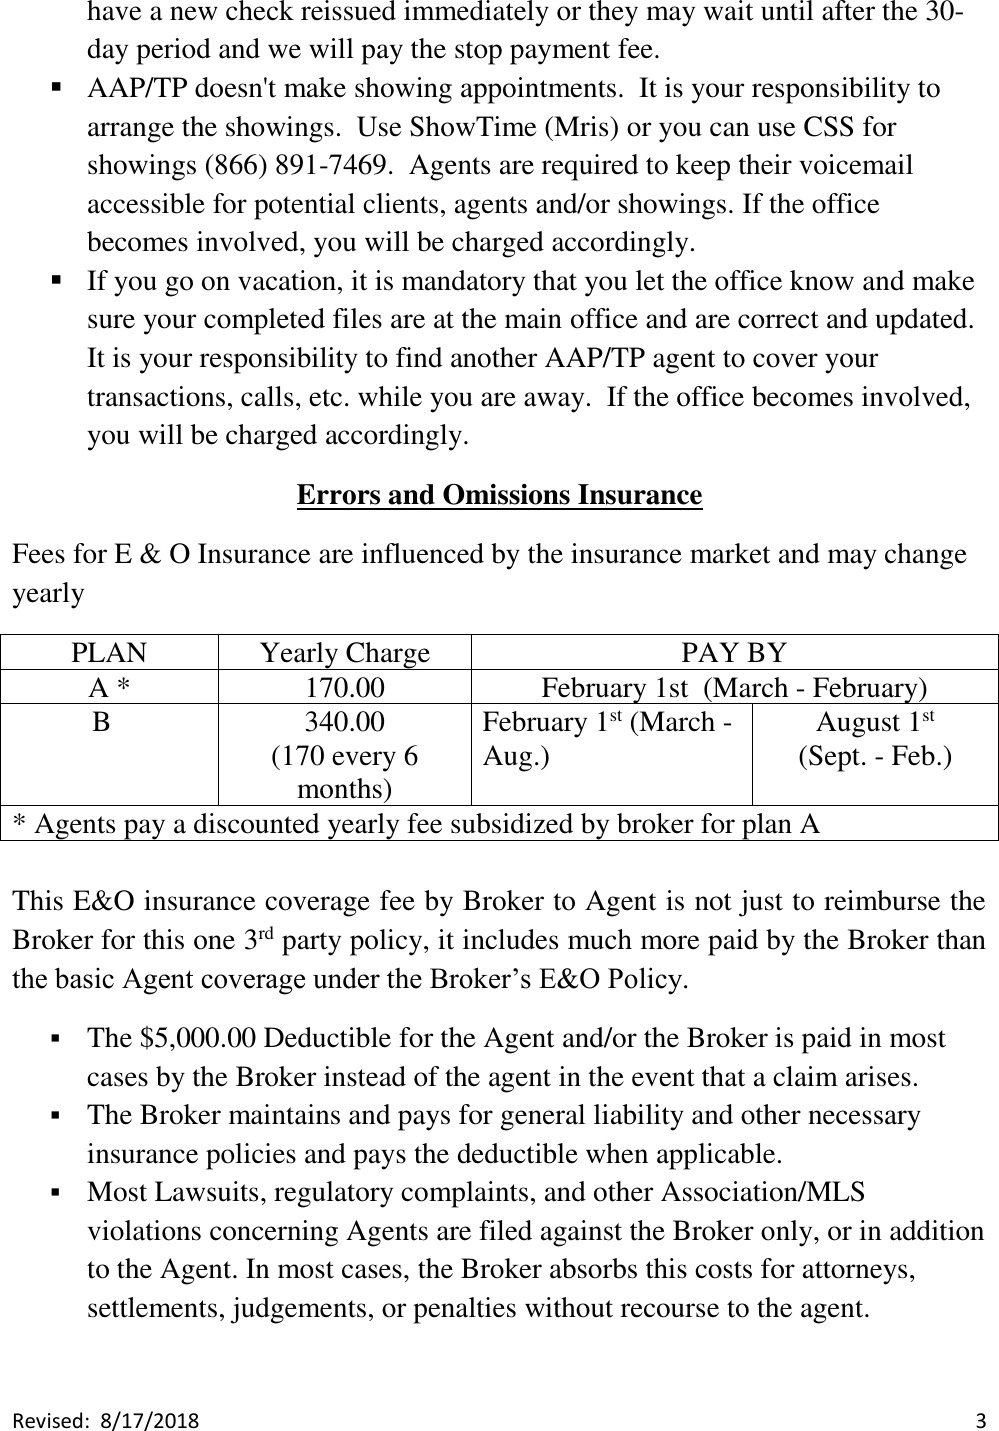 Page 3 of 8 - Policy Manual 2018